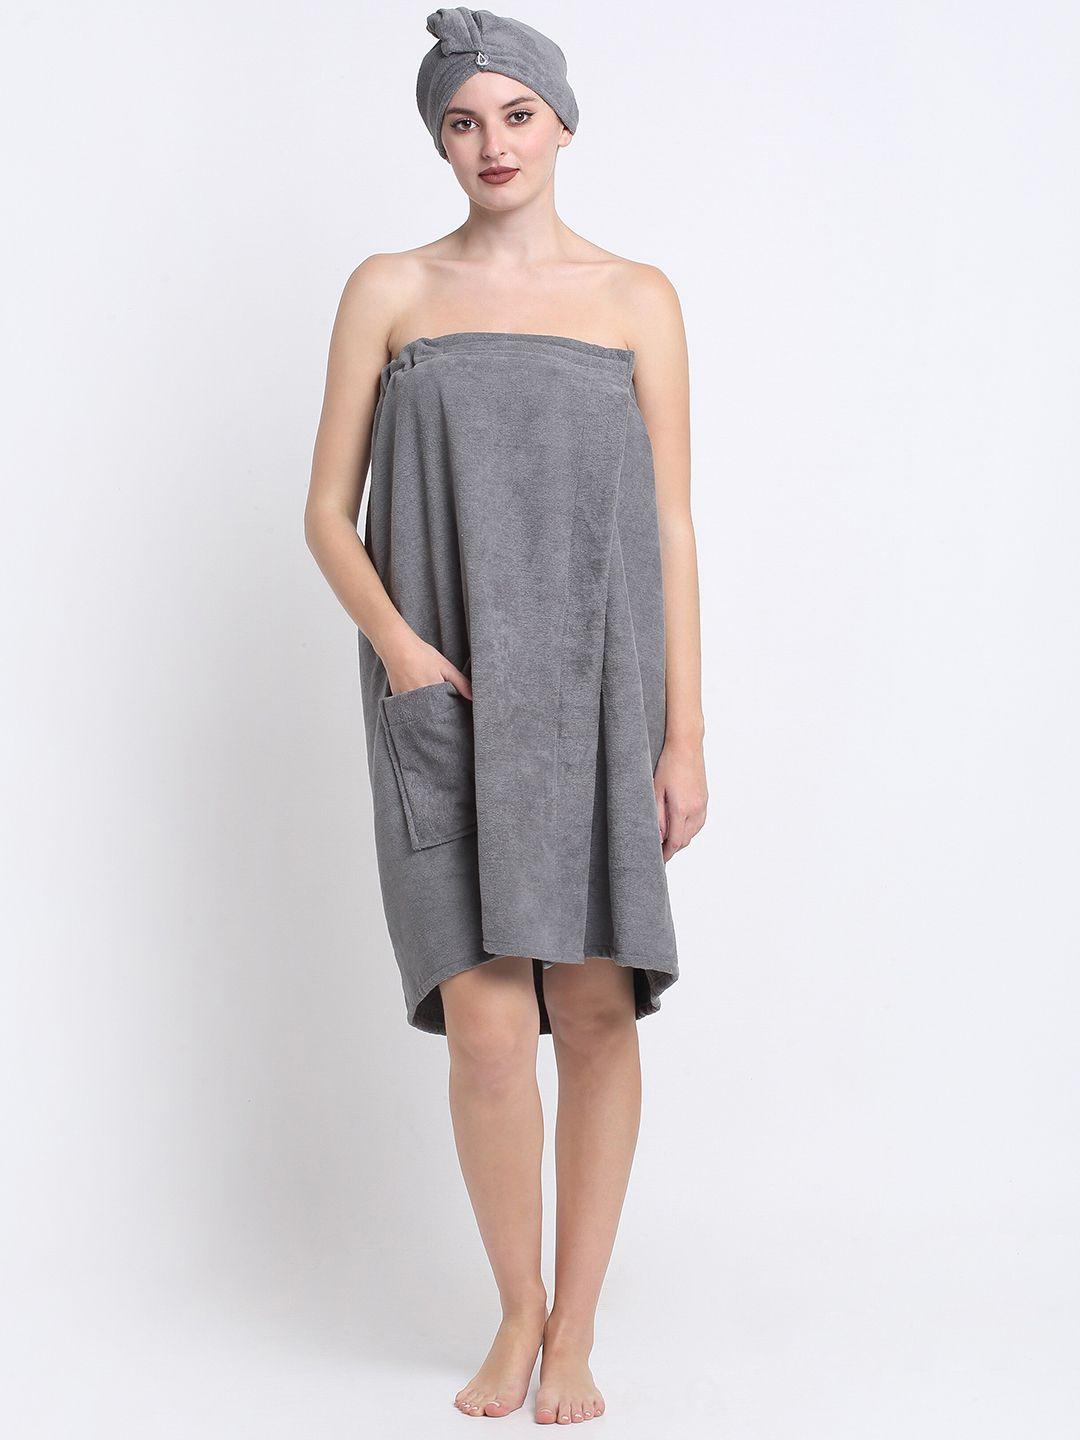 creeva luxury charcoal 380 gsm highly absorbent pure cotton bath wrap towel robe